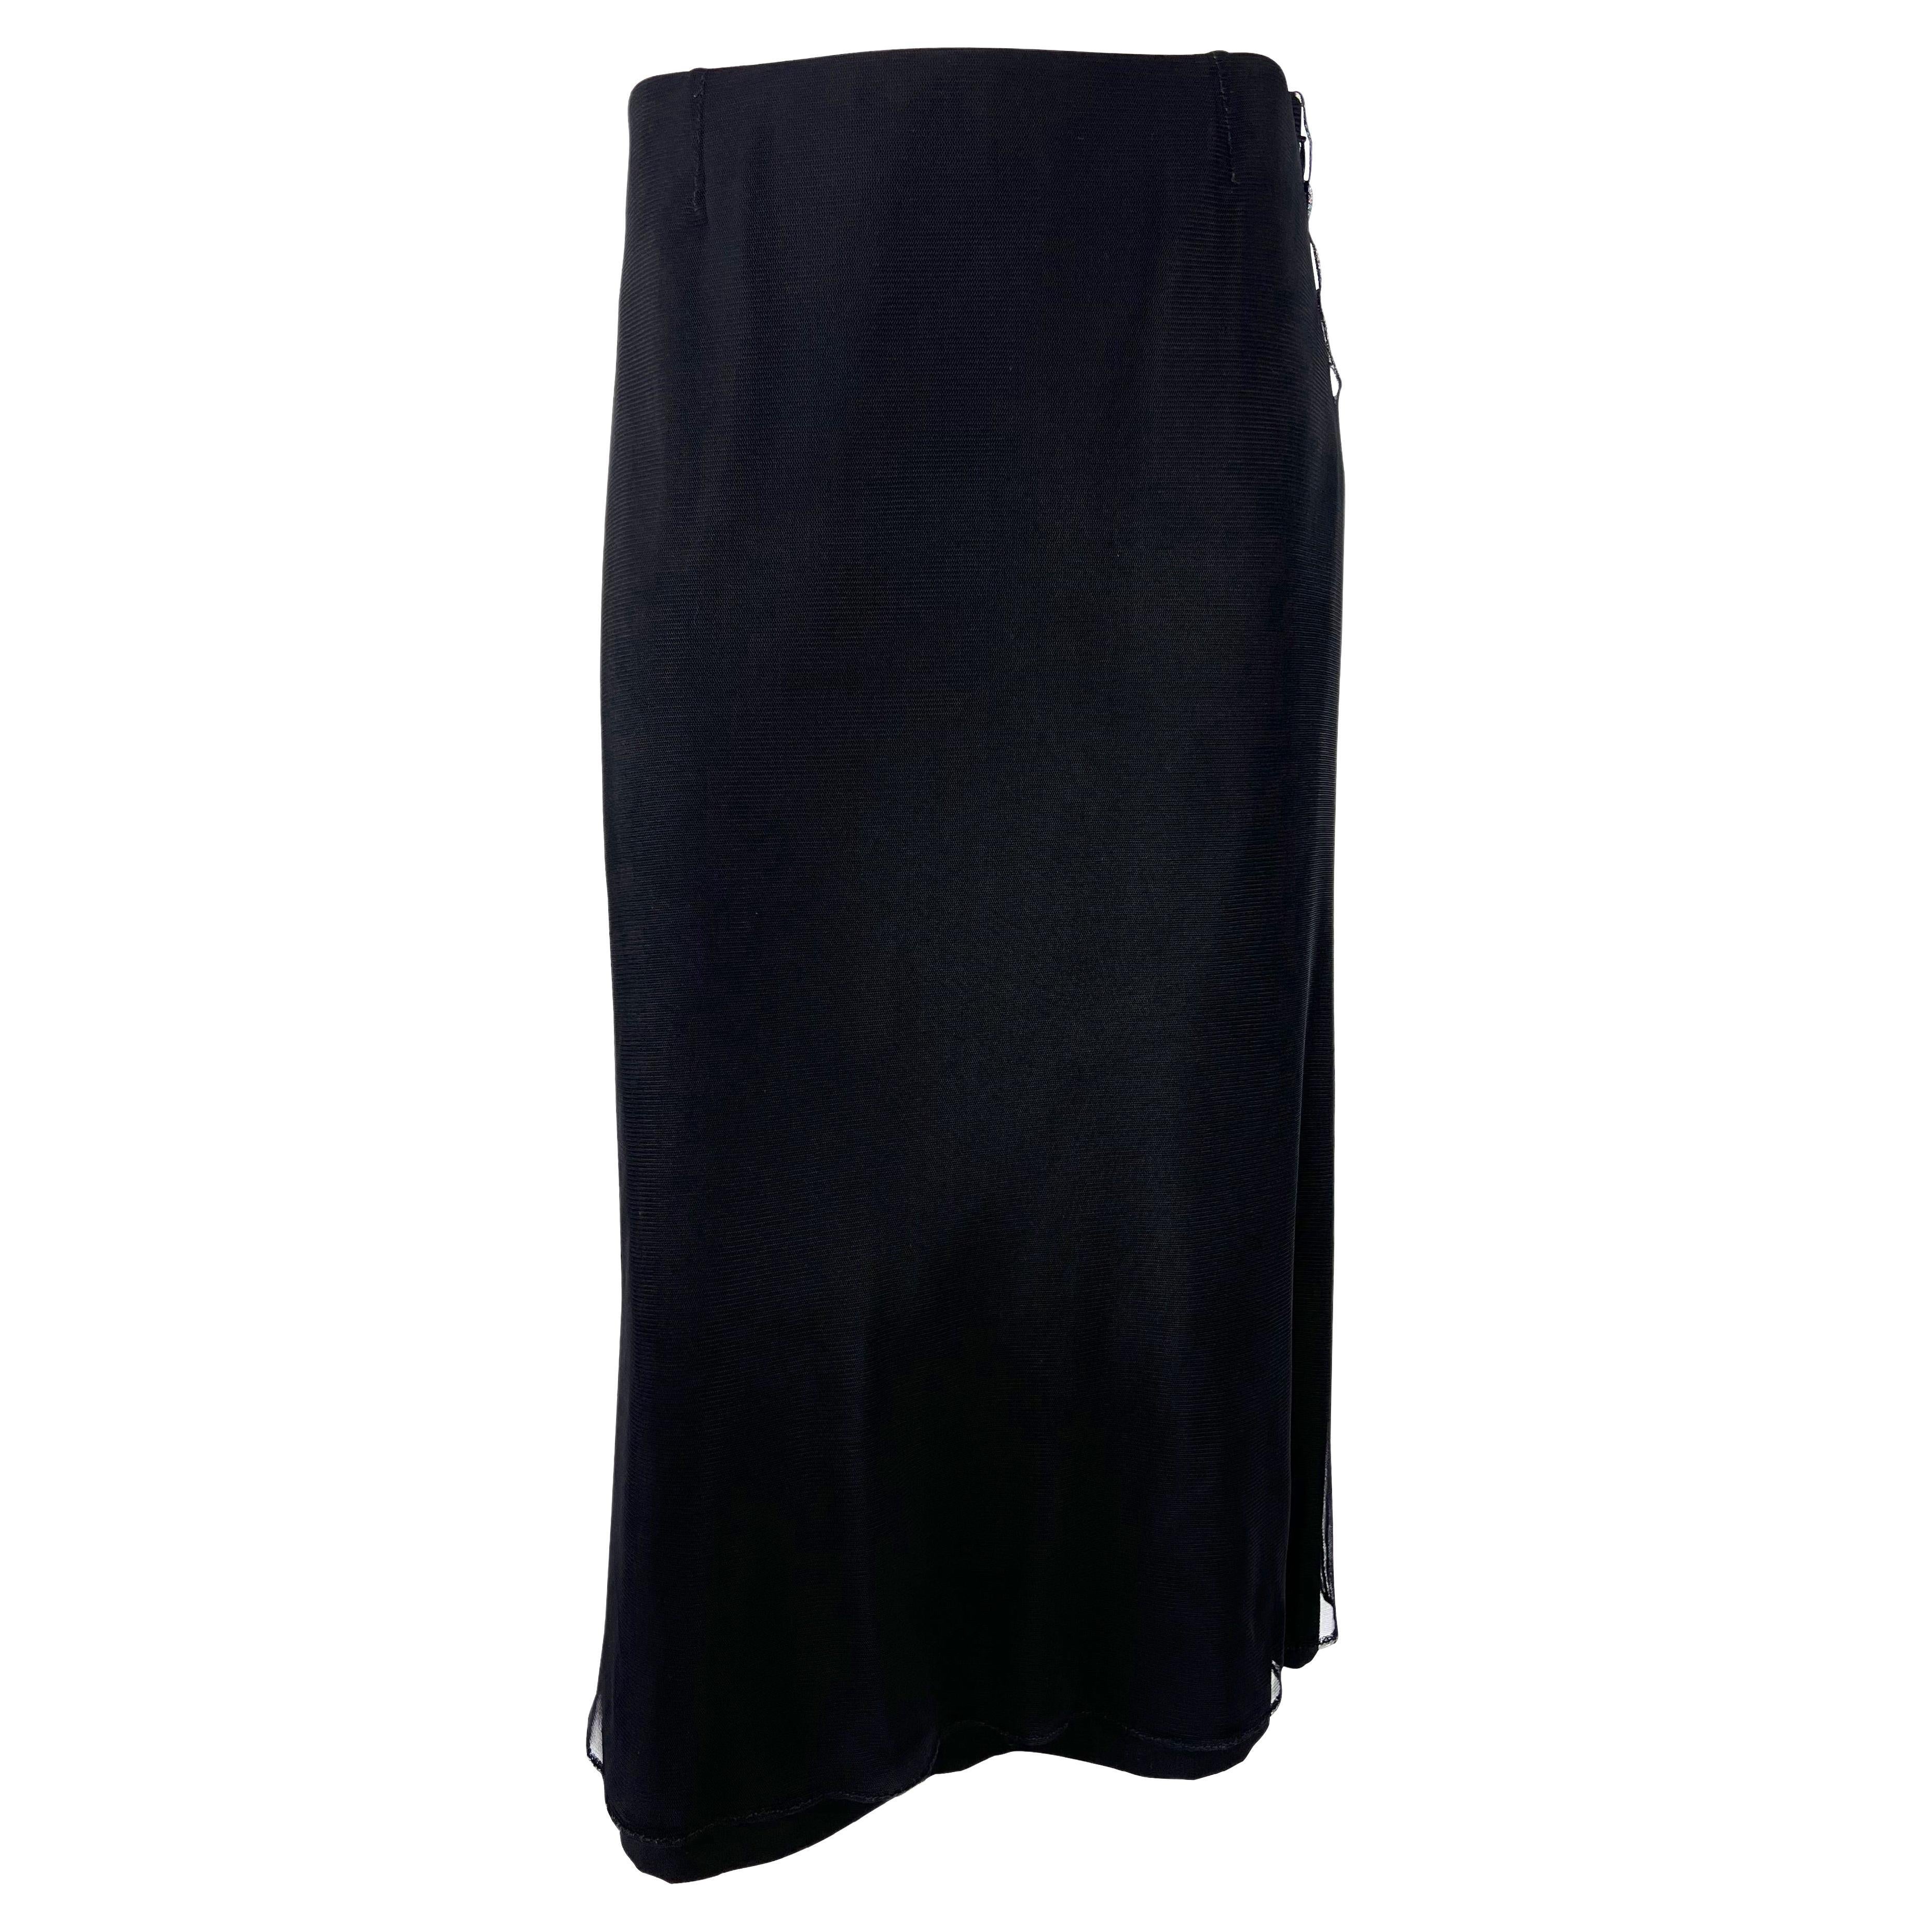 S/S 1999 Gucci by Tom Ford Black Tulle Mesh Overlay Sample Skirt For Sale